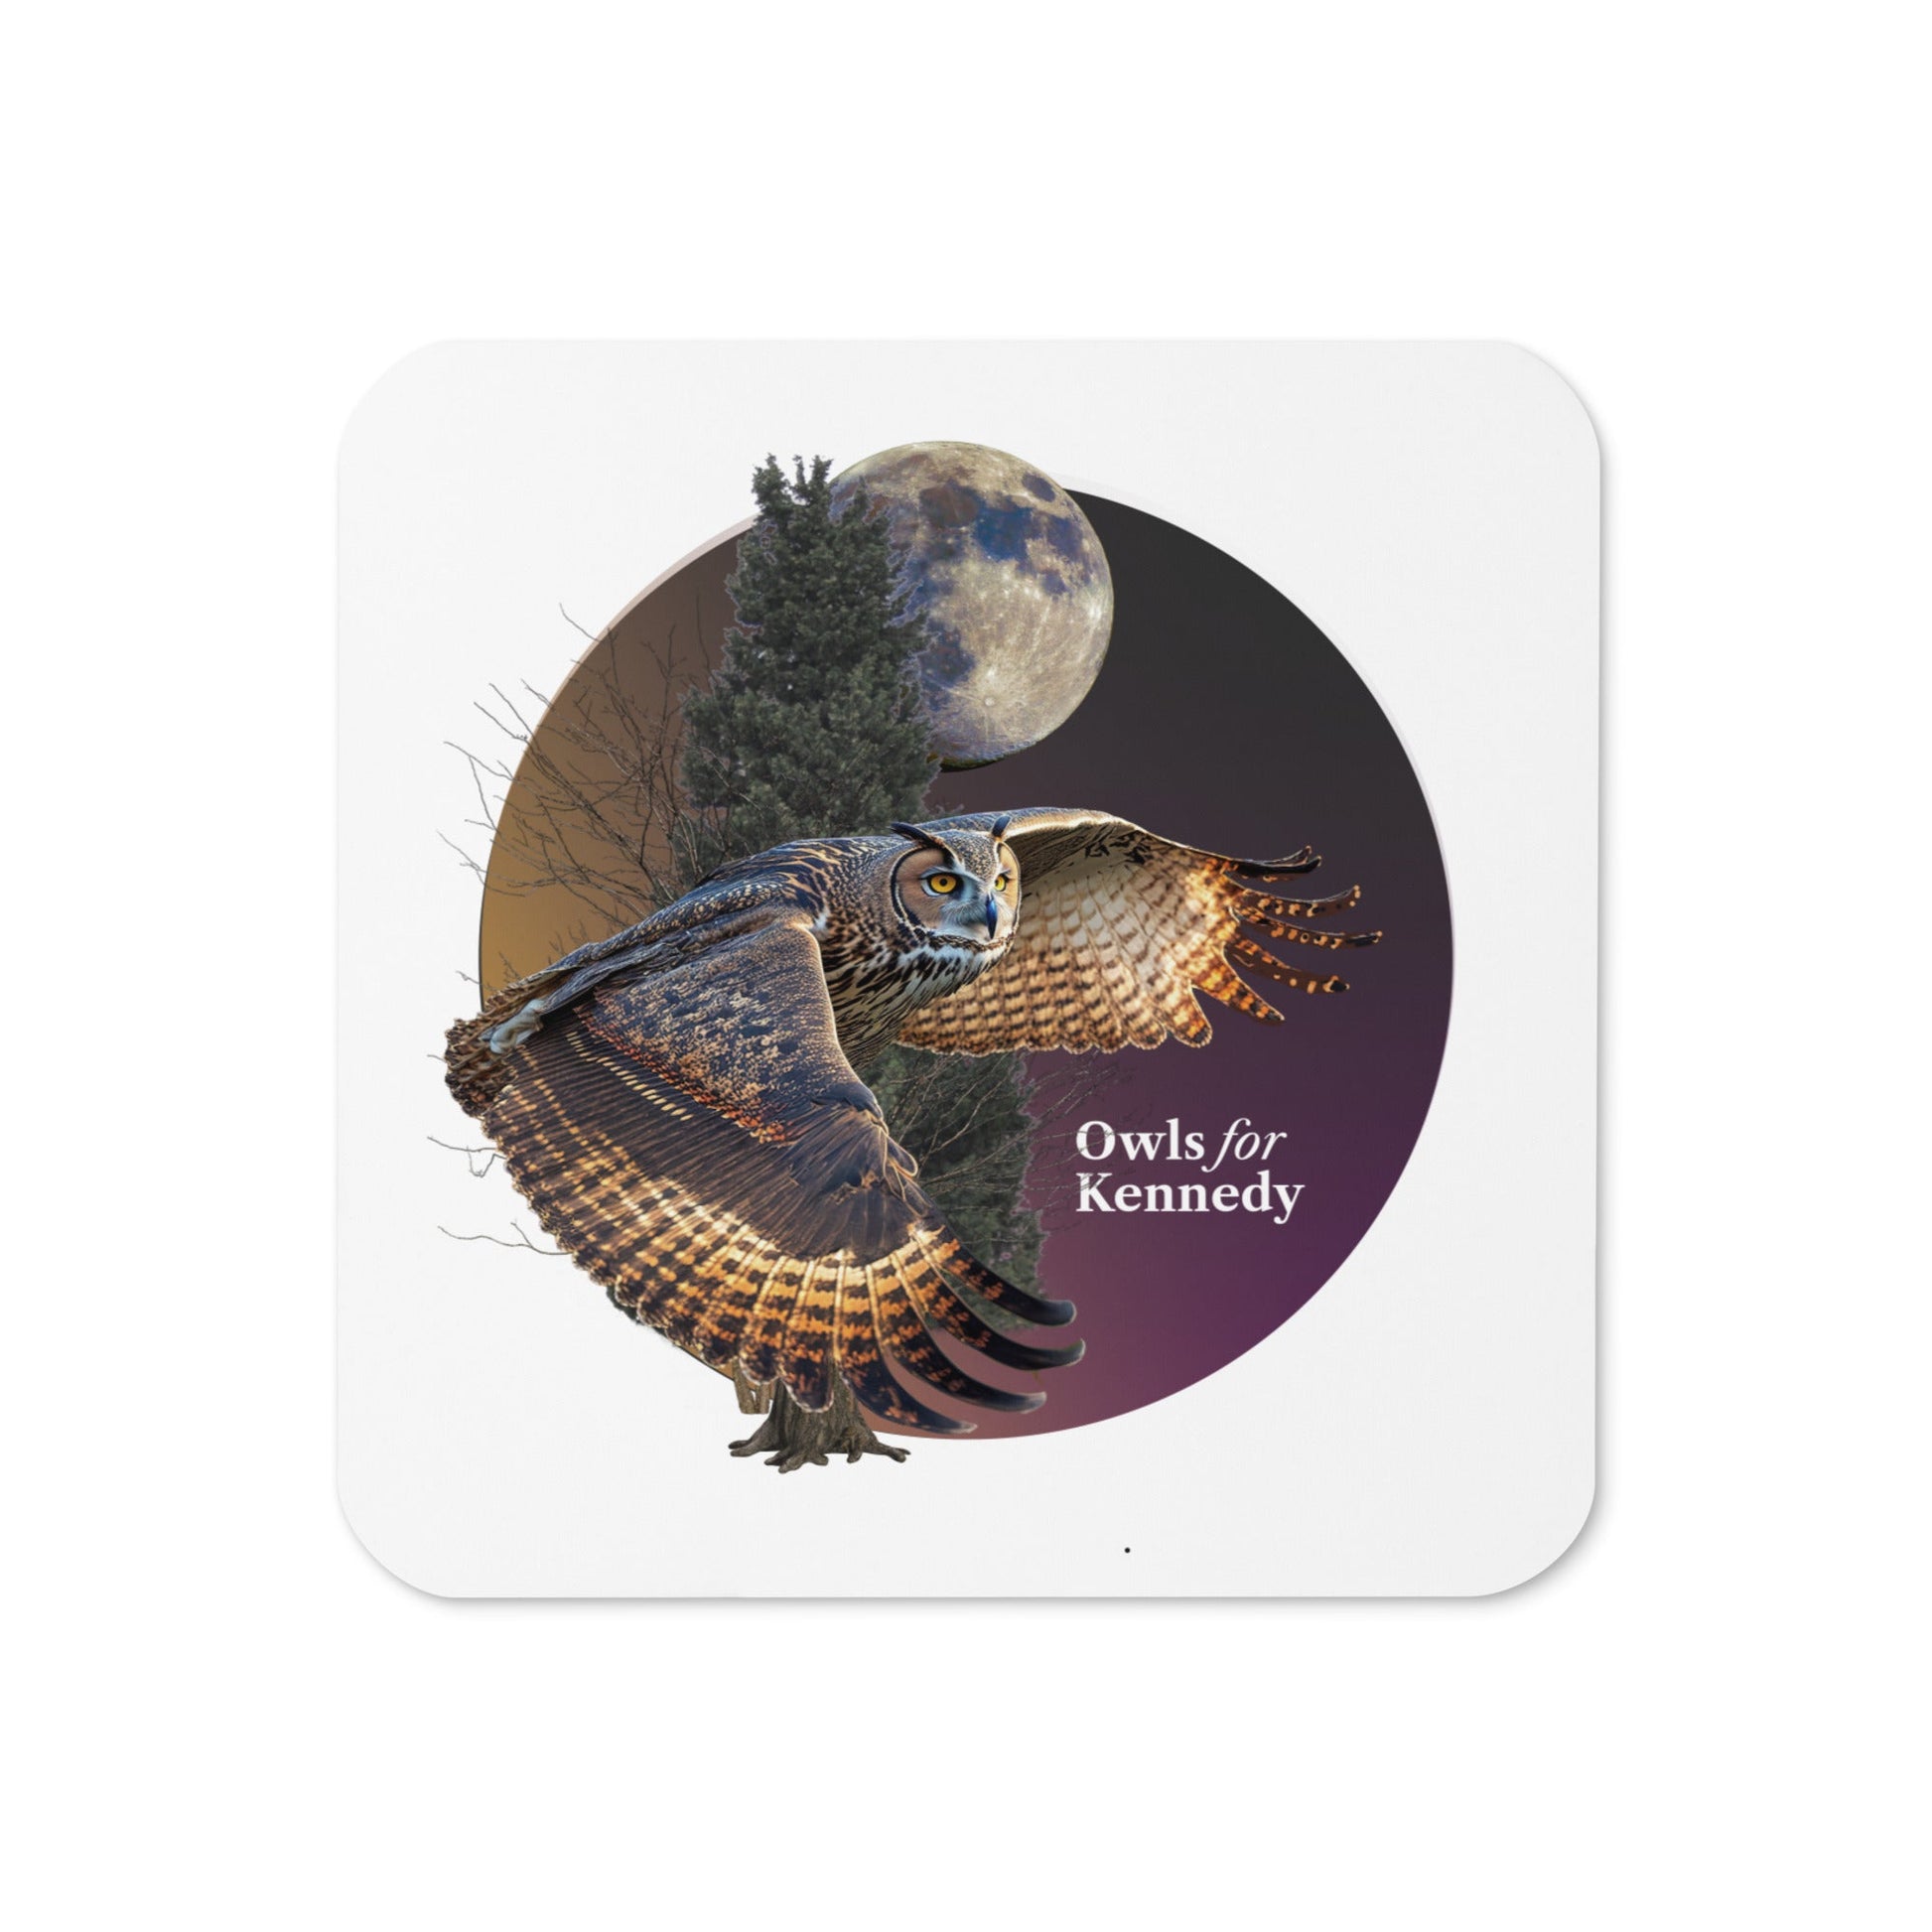 Owls for Kennedy Cork - Back Drink Coaster - TEAM KENNEDY. All rights reserved